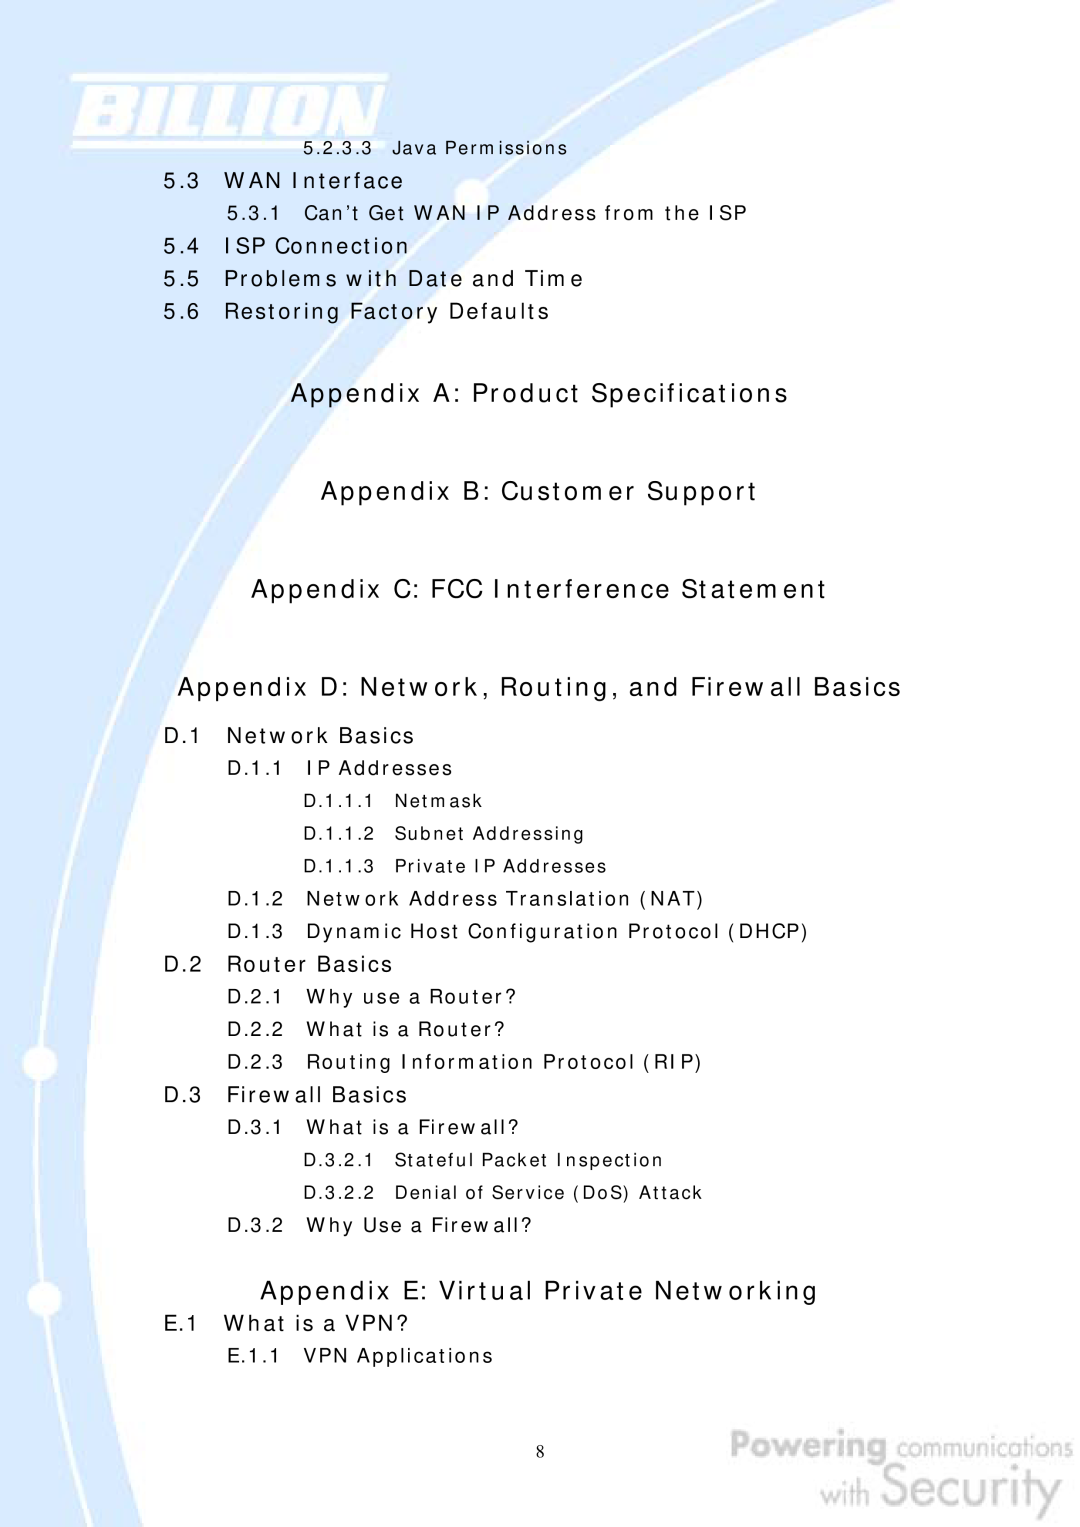 Billion Electric Company 30 user manual Appendix A Product Specifications Appendix B Customer Support, WAN Interface 